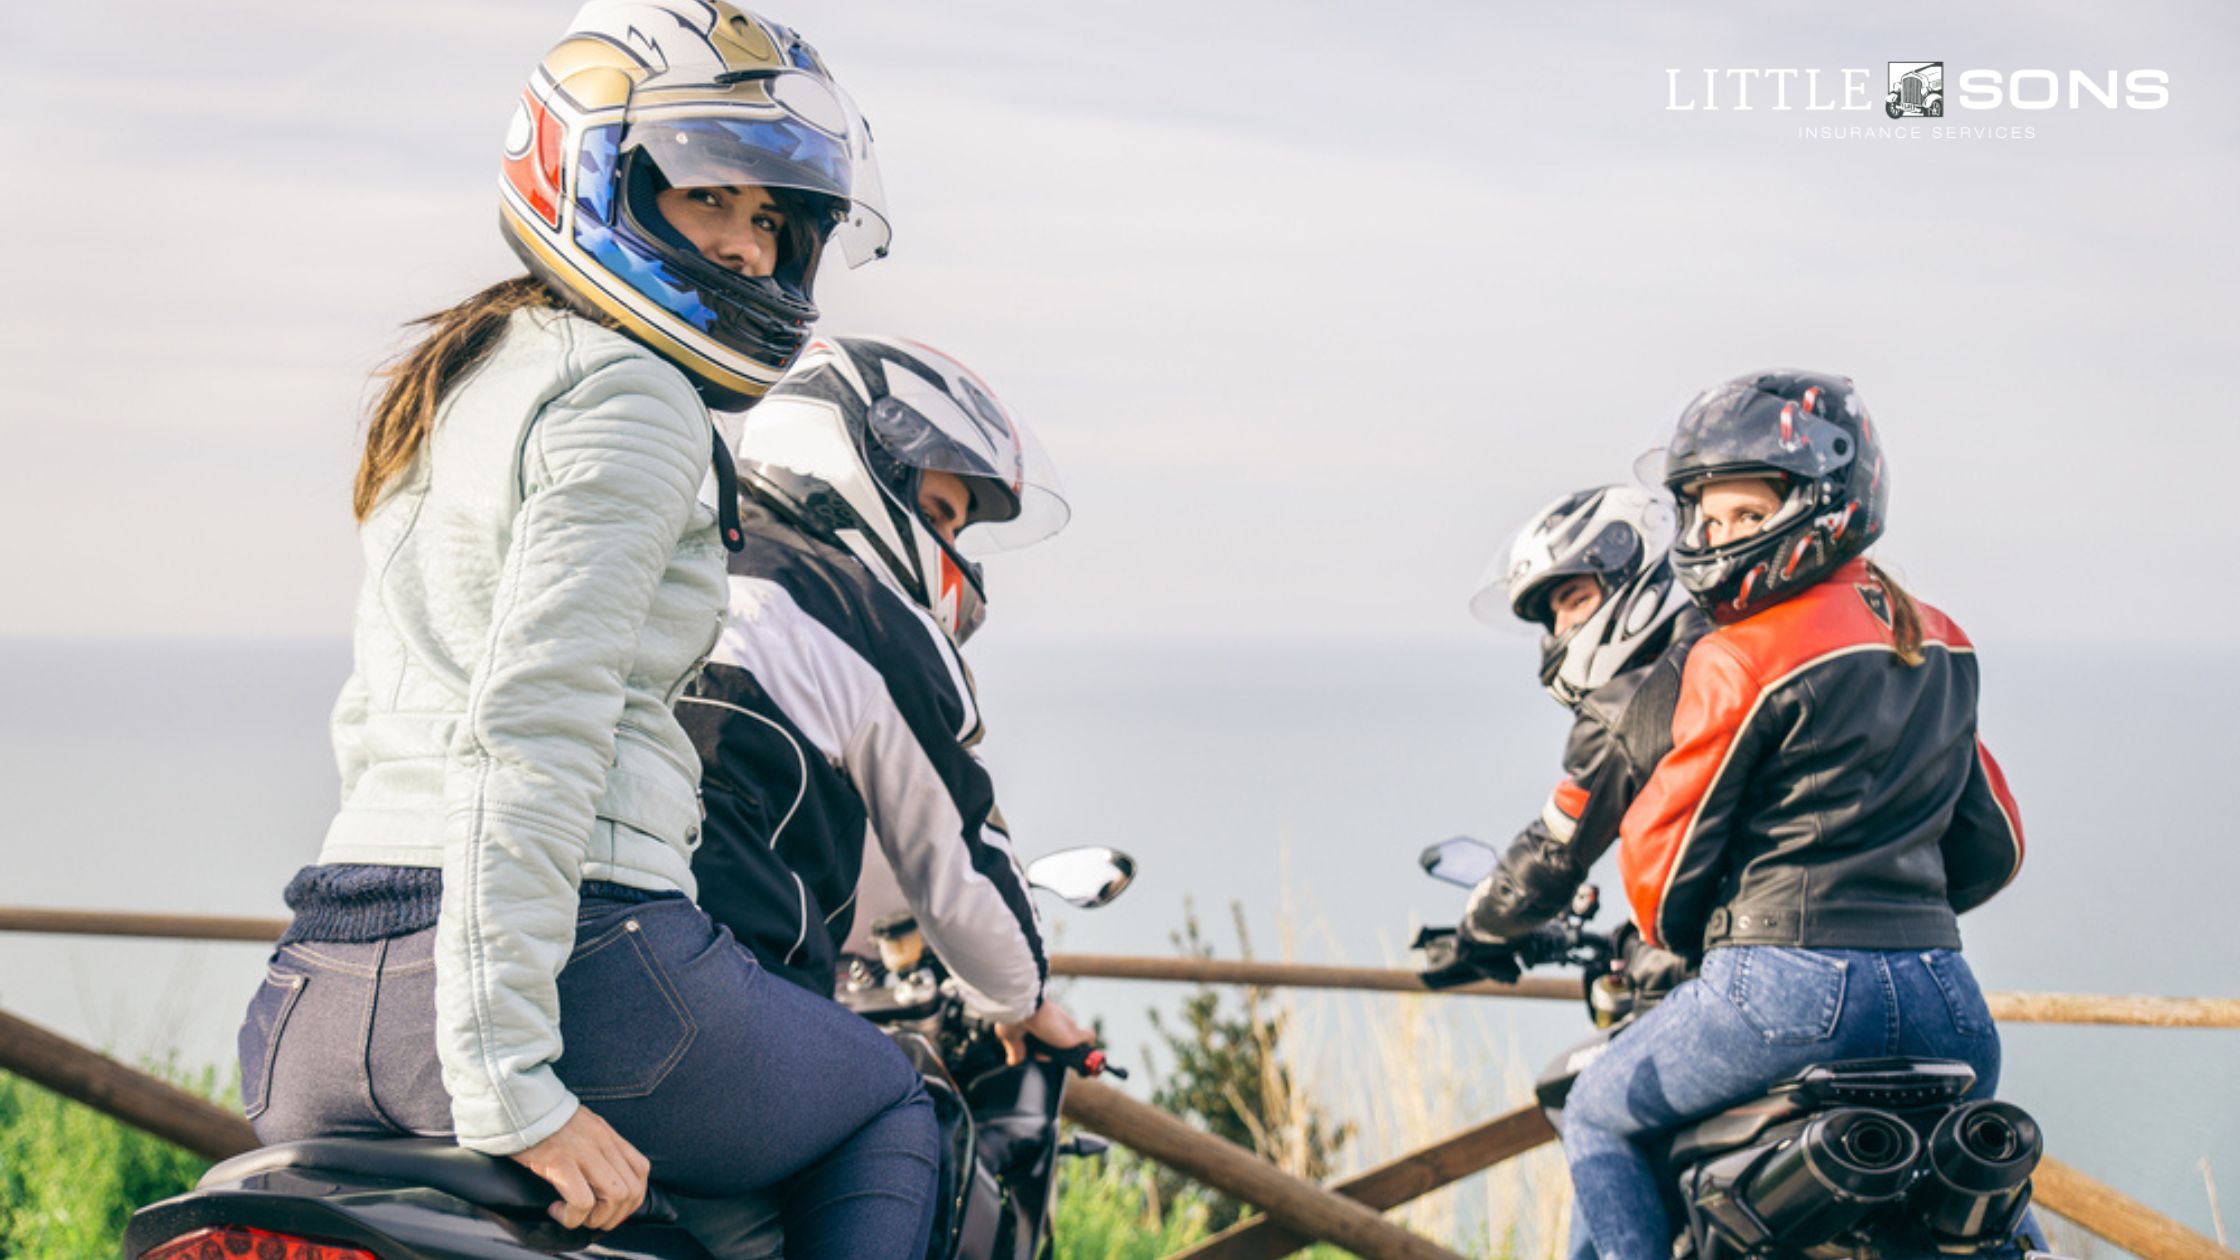 Is Your Passenger Protected? A Guide to Motorcycle Insurance Coverage for Others